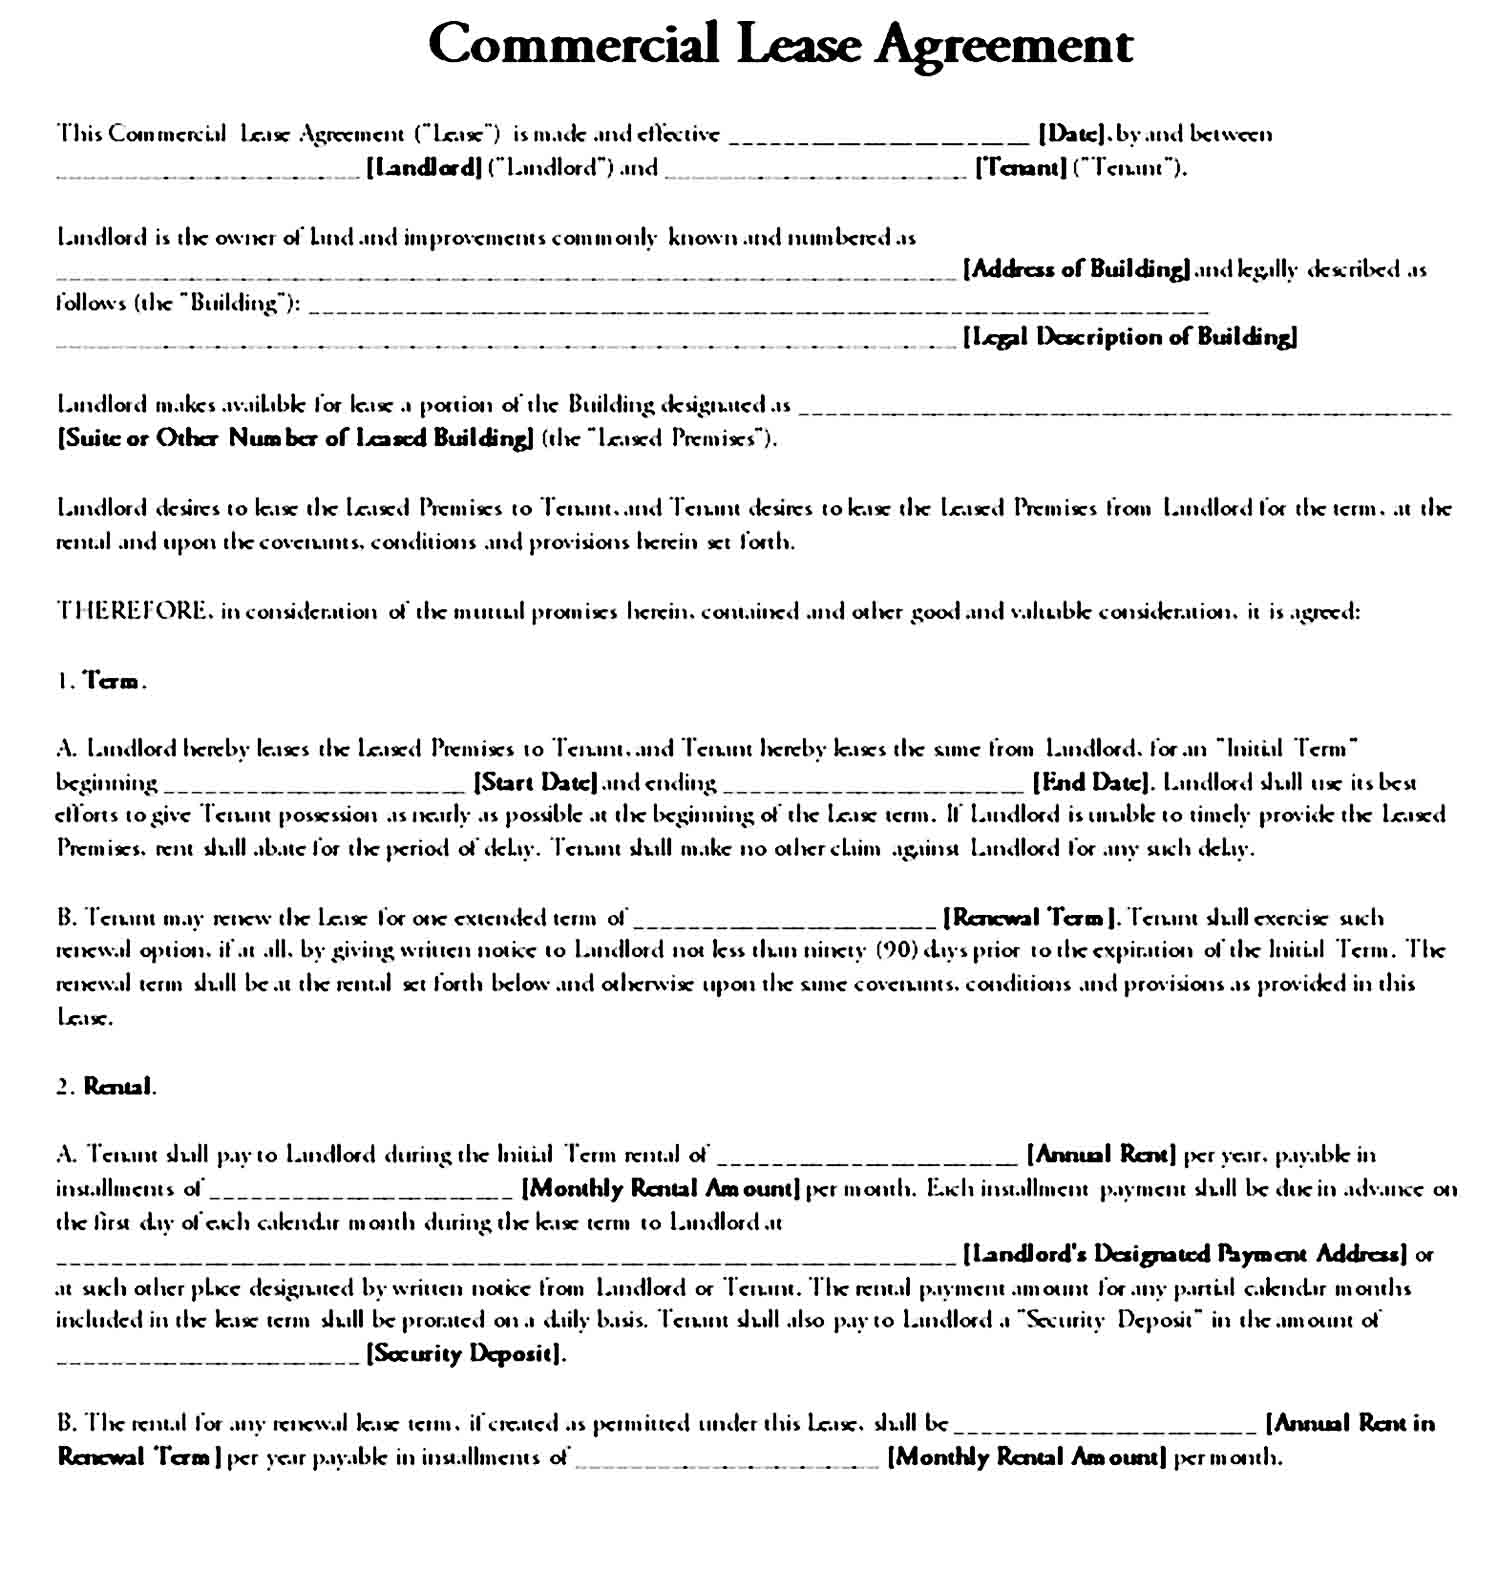 Commercial Lease Agreement Template 01